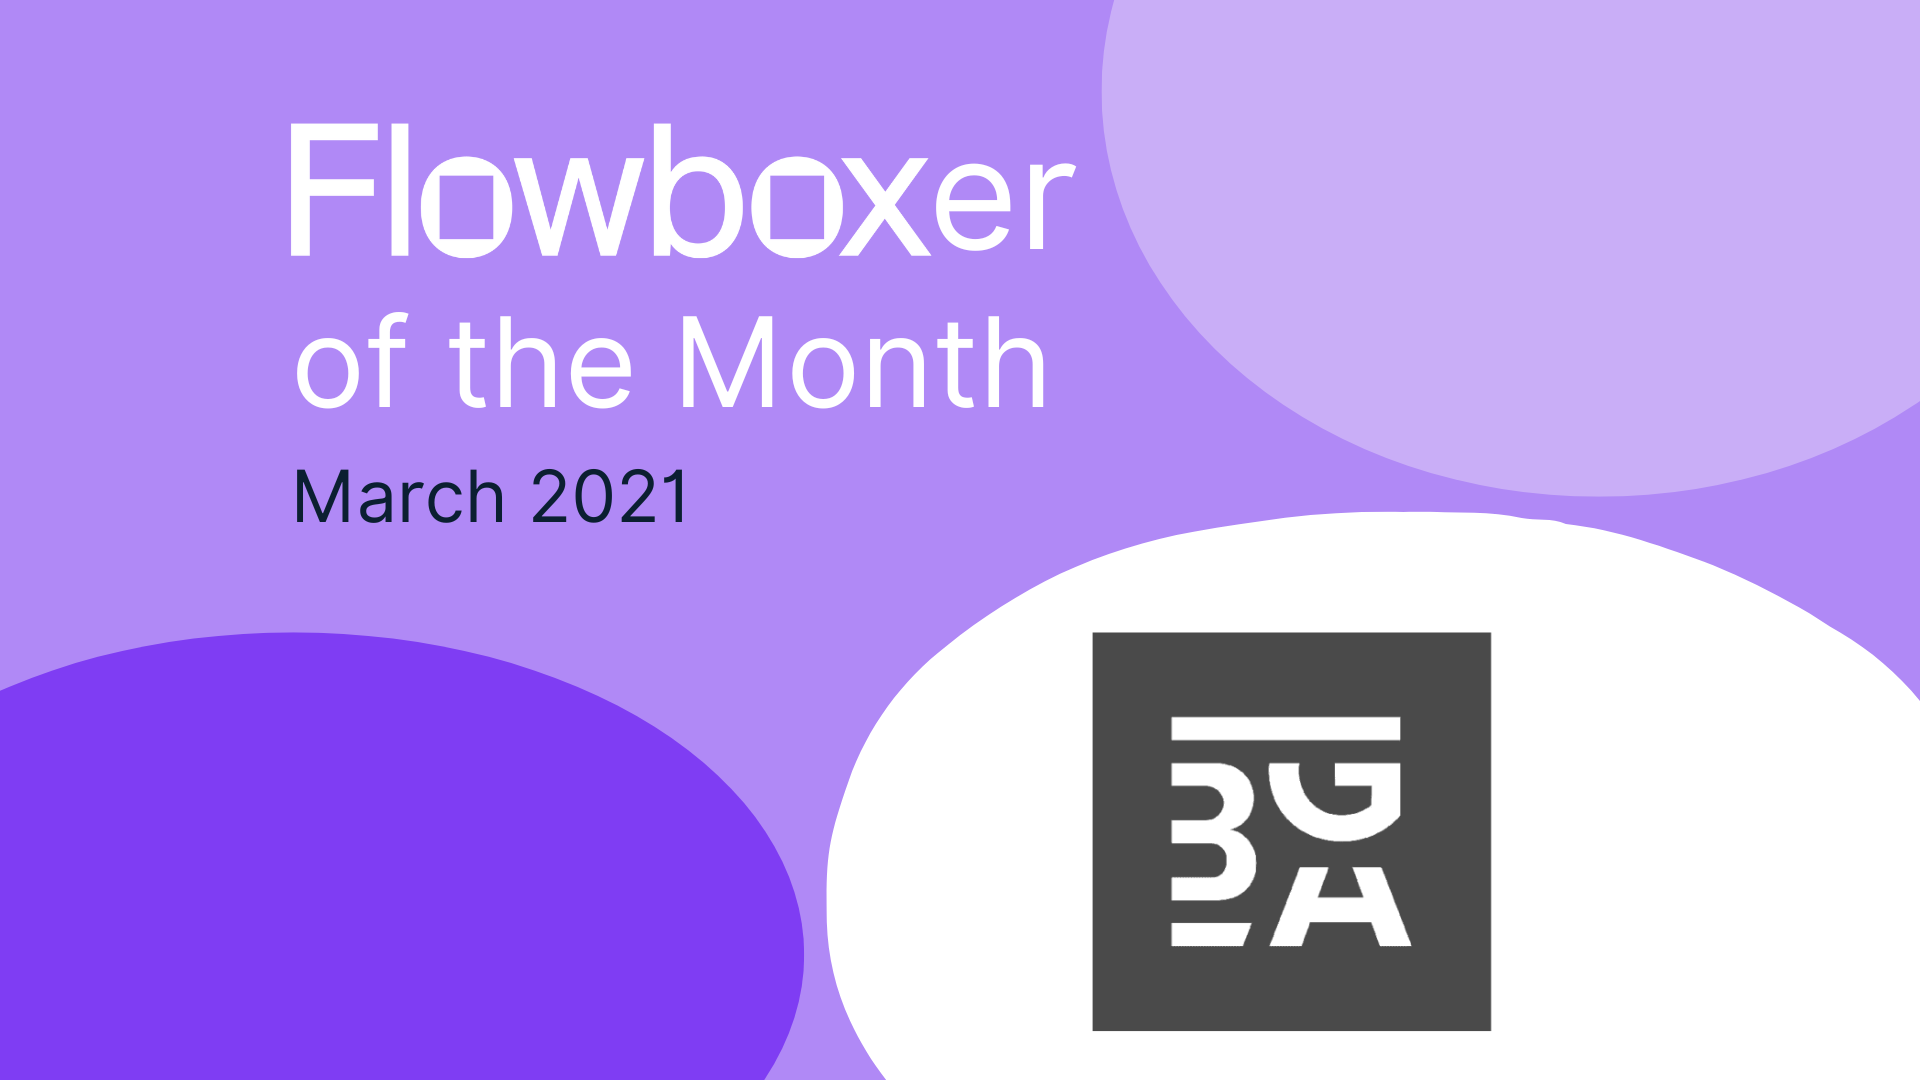 Flowboxer of the month – March 2021: BGA